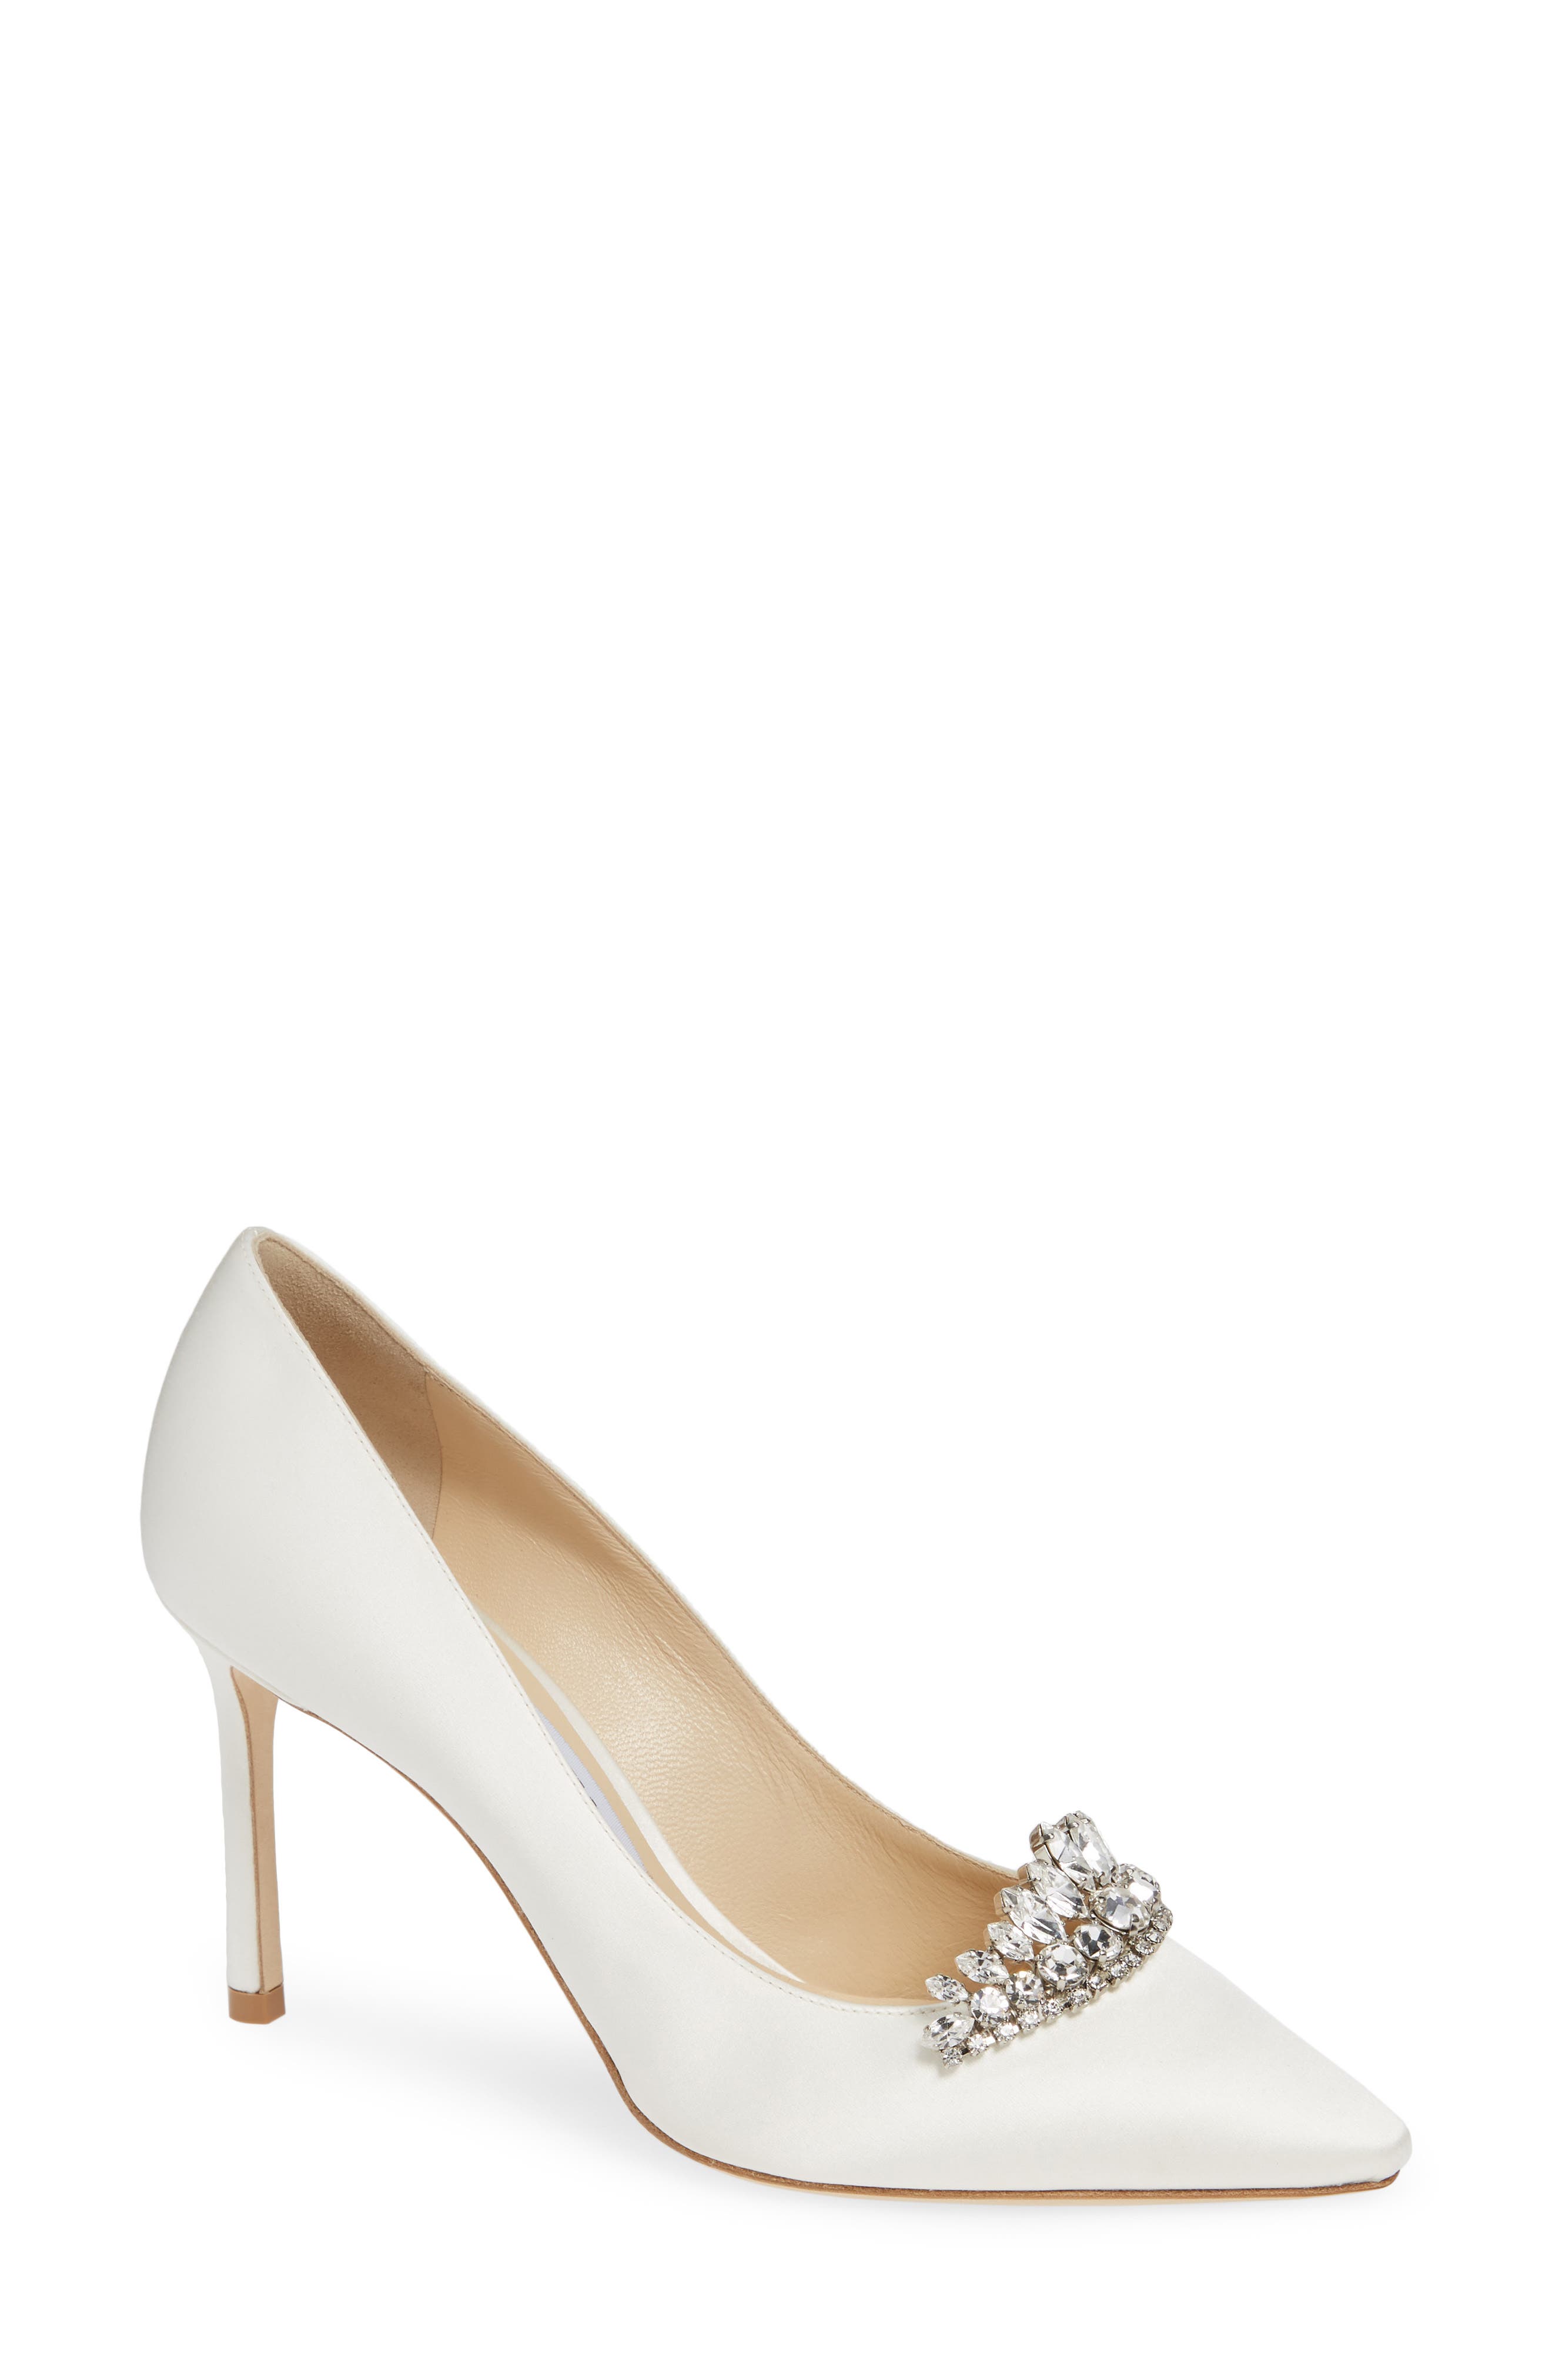 jimmy choo crystal shoes price